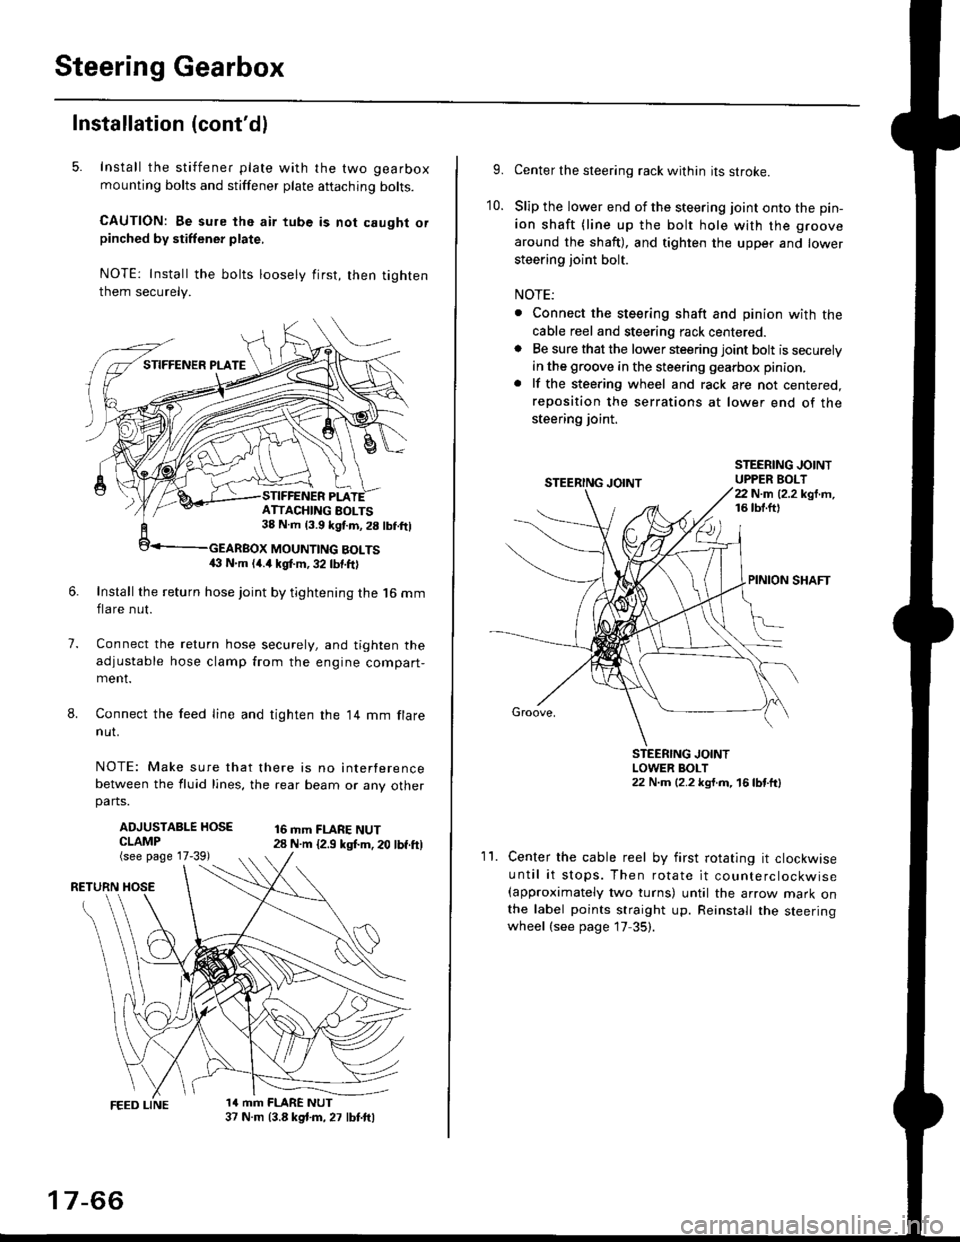 HONDA CIVIC 1998 6.G Service Manual Steering Gearbox
Installation (contdl
5. Install the stiffener plate with the two gearbox
mounting bolts and stiffener plate aftaching bolts.
CAUTION: Be sure the air tube is not caught orpinched by 